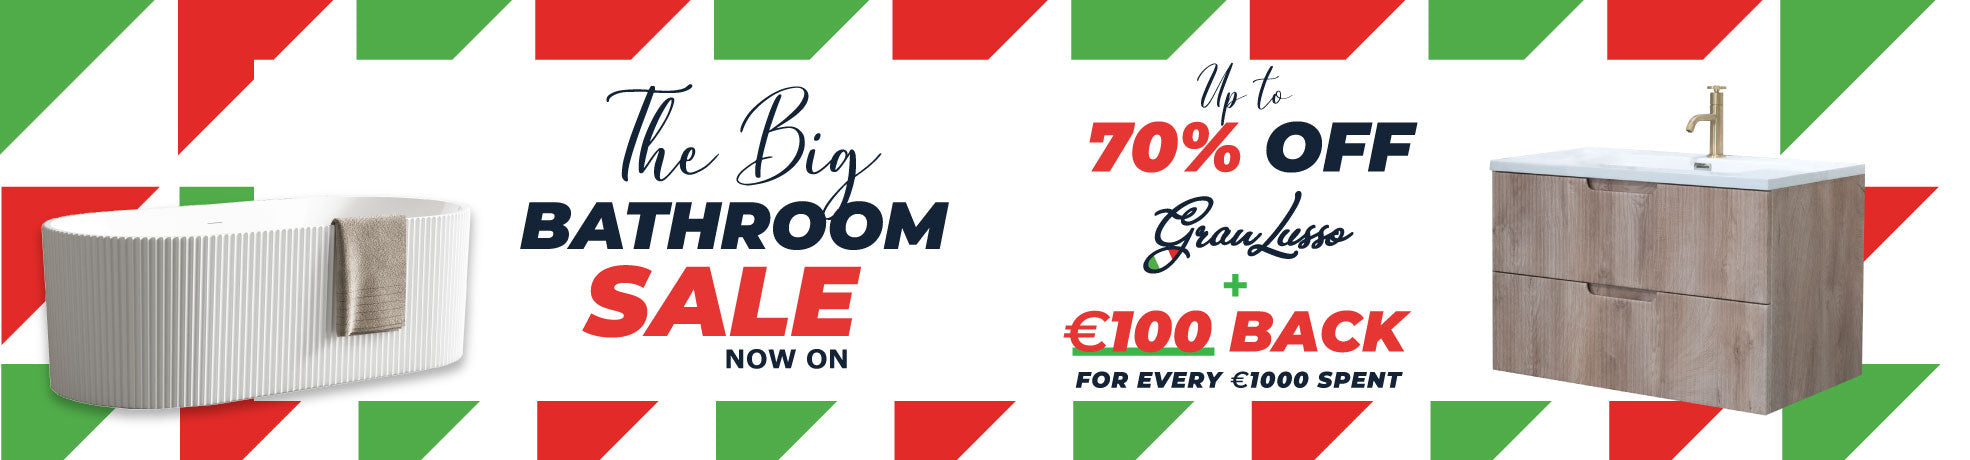 Get up to 70% off Granlusso Bathrooms in our big bathroom sale